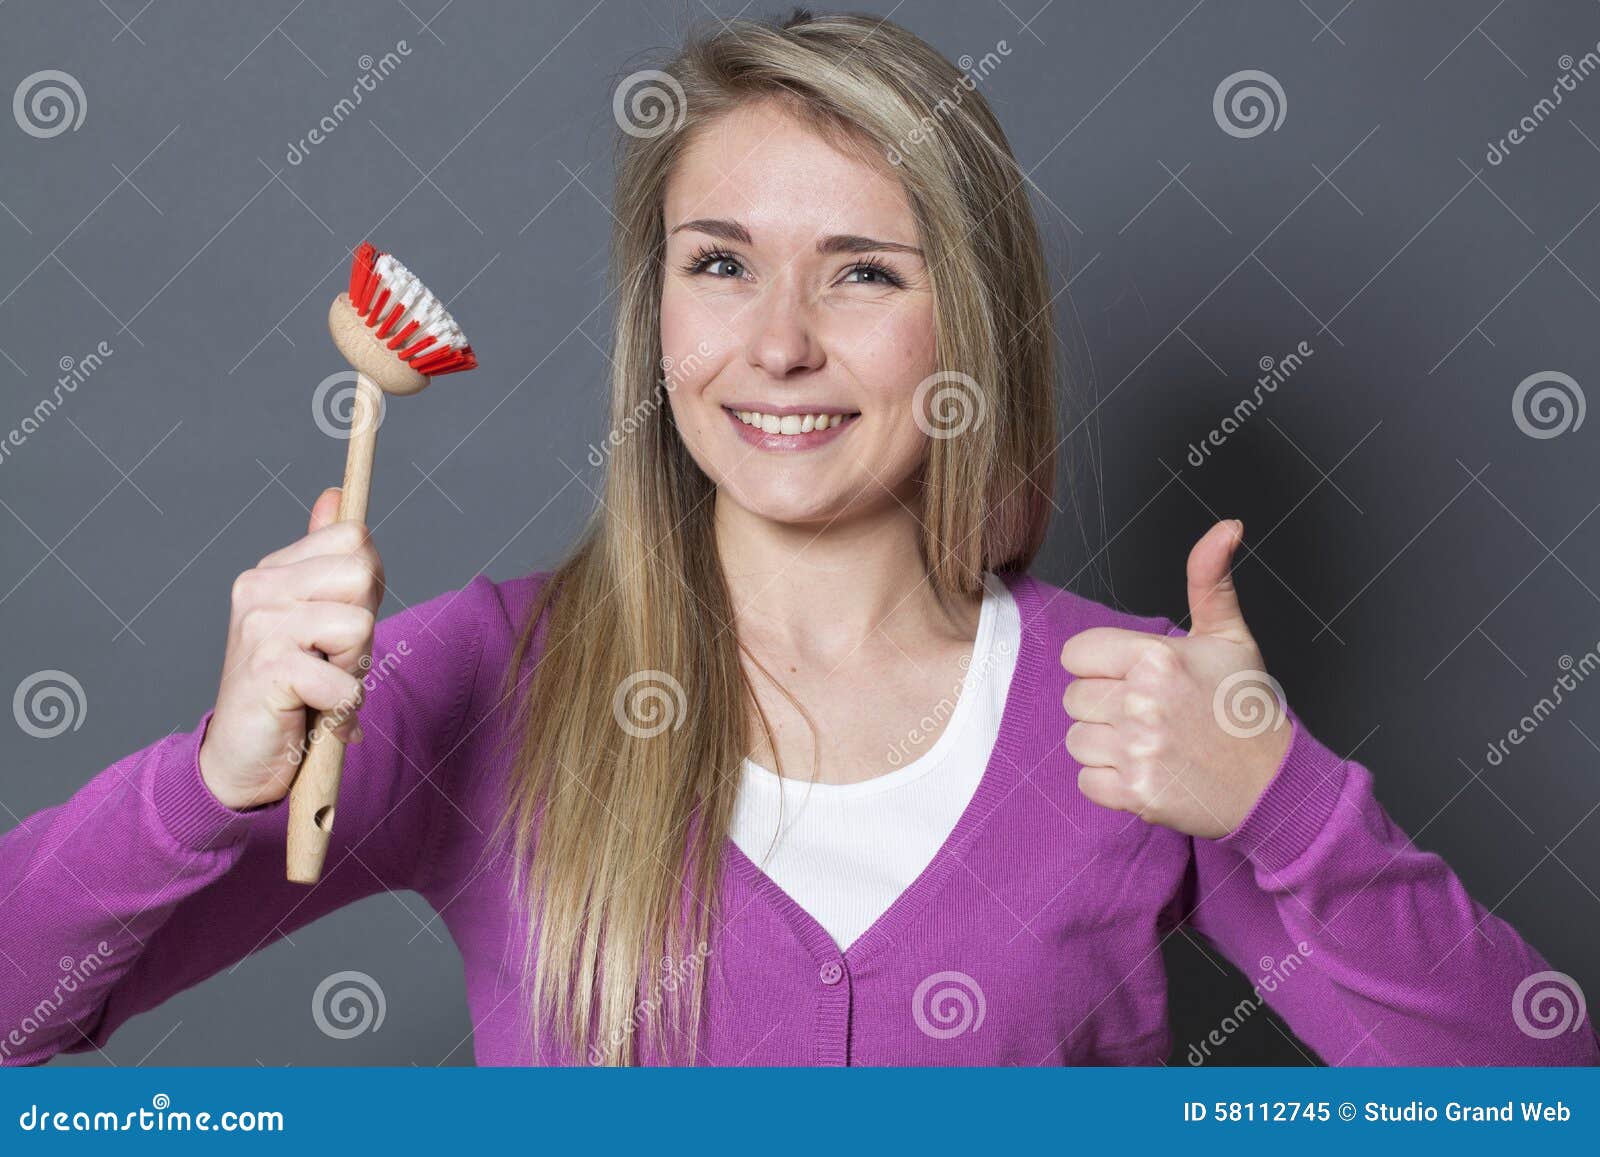 thrilled-s-girl-agreeing-cleaning-dishes-house-cleaning-playful-young-blond-woman-wearing-purple-sweater-holding-dish-58112745.jpg